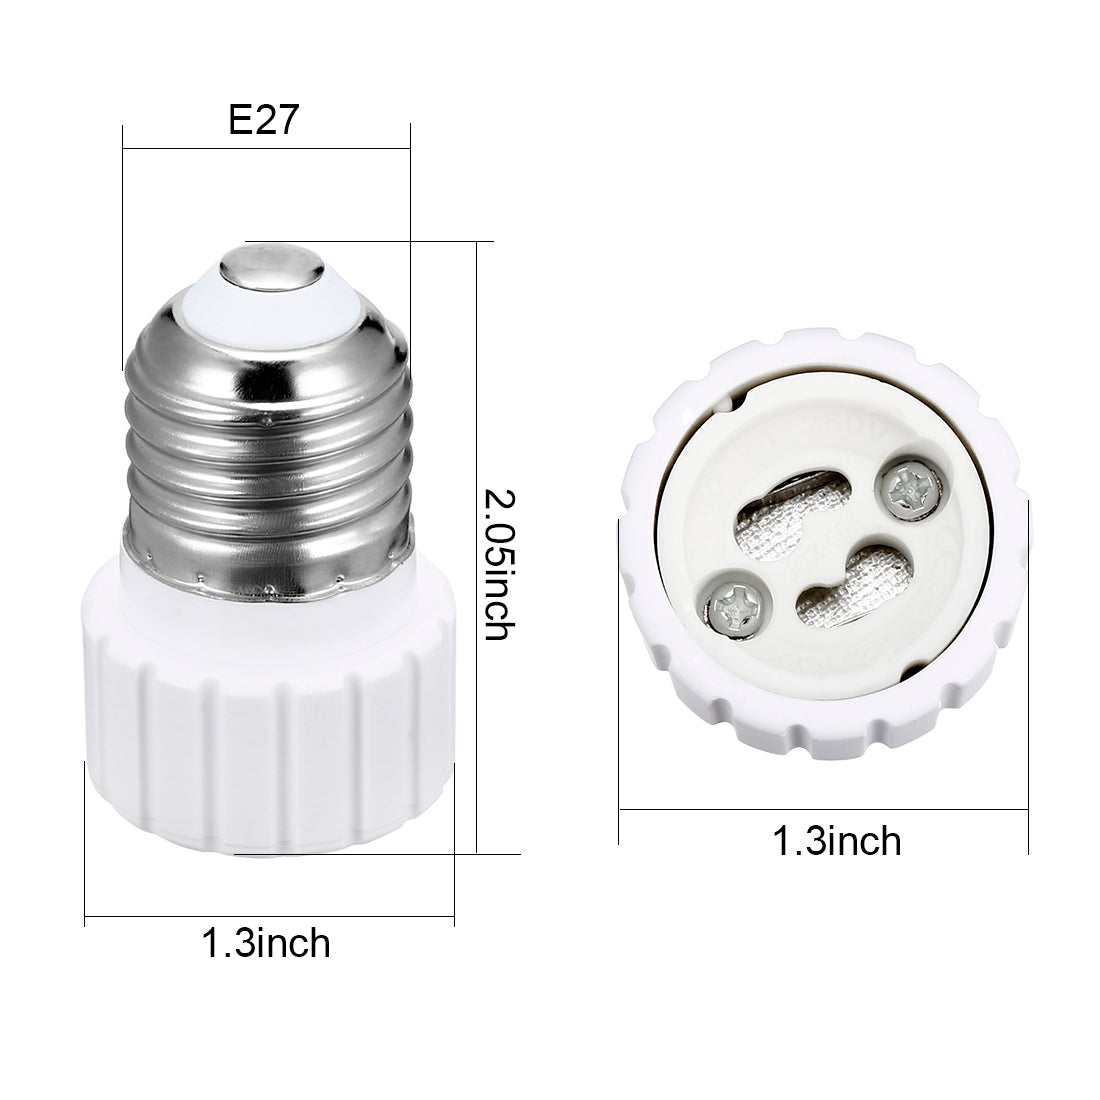 uxcell Uxcell 3pcs AC 250V 2A E27 to GU10 Socket Adapter PBT Lamp Bulb Holder 200 Degree Heat Resistant